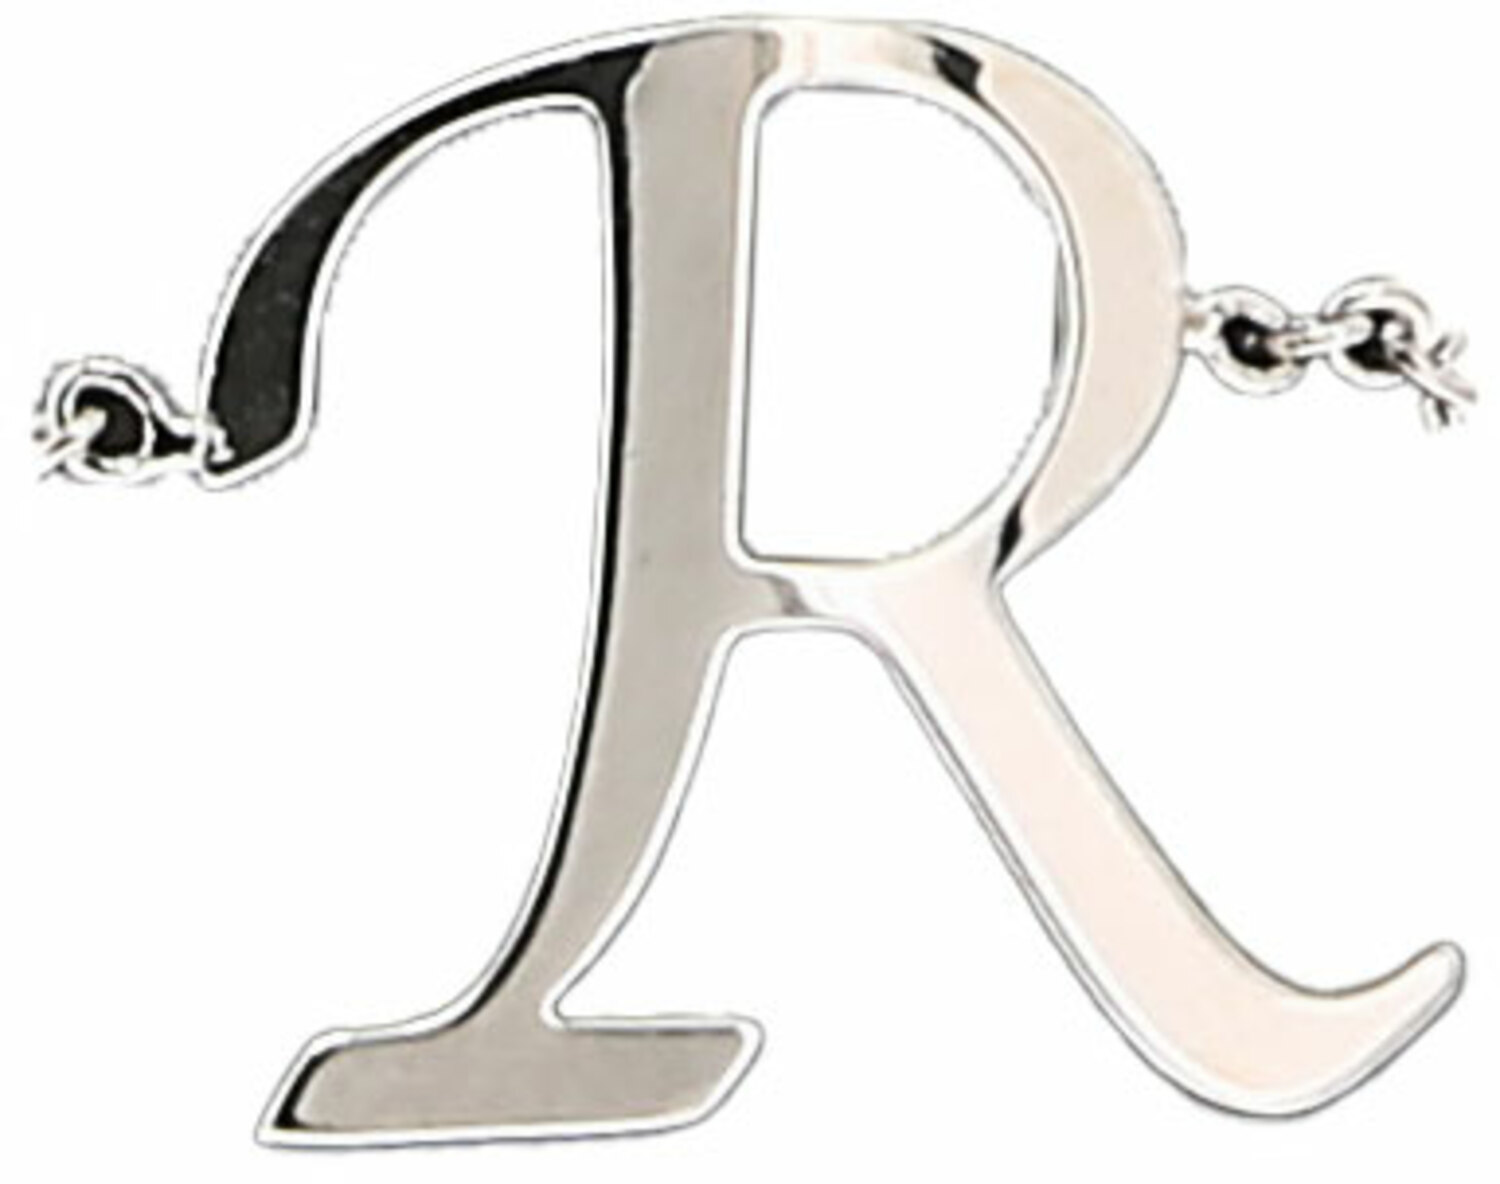 R by H2Z - Jewelry - R - Adjustable Rhodium Plated Monogram Ring